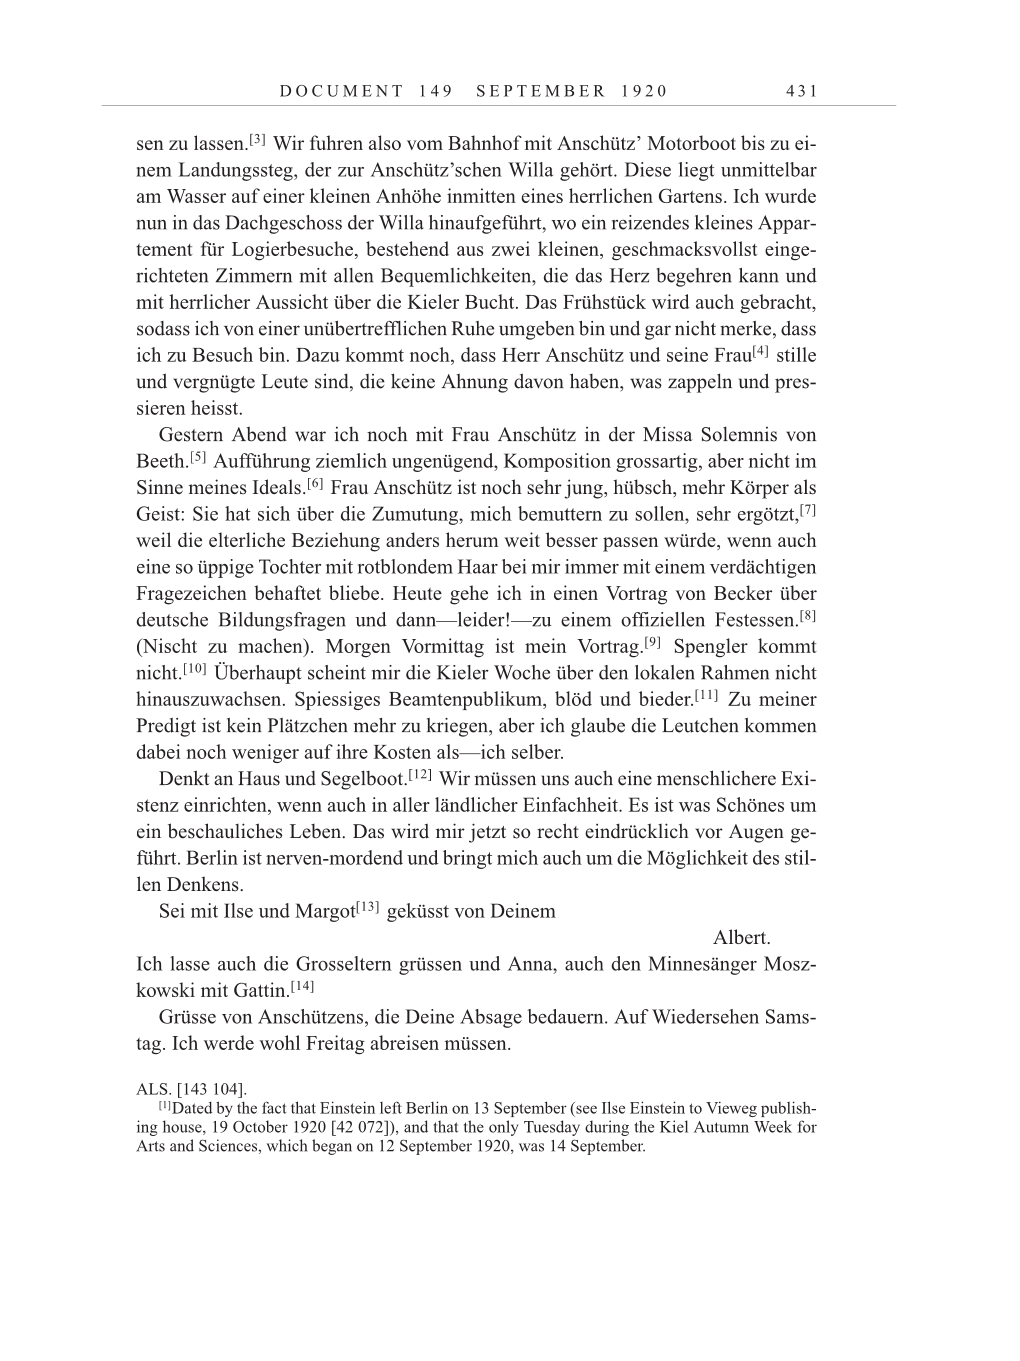 Volume 10: The Berlin Years: Correspondence May-December 1920 / Supplementary Correspondence 1909-1920 page 431